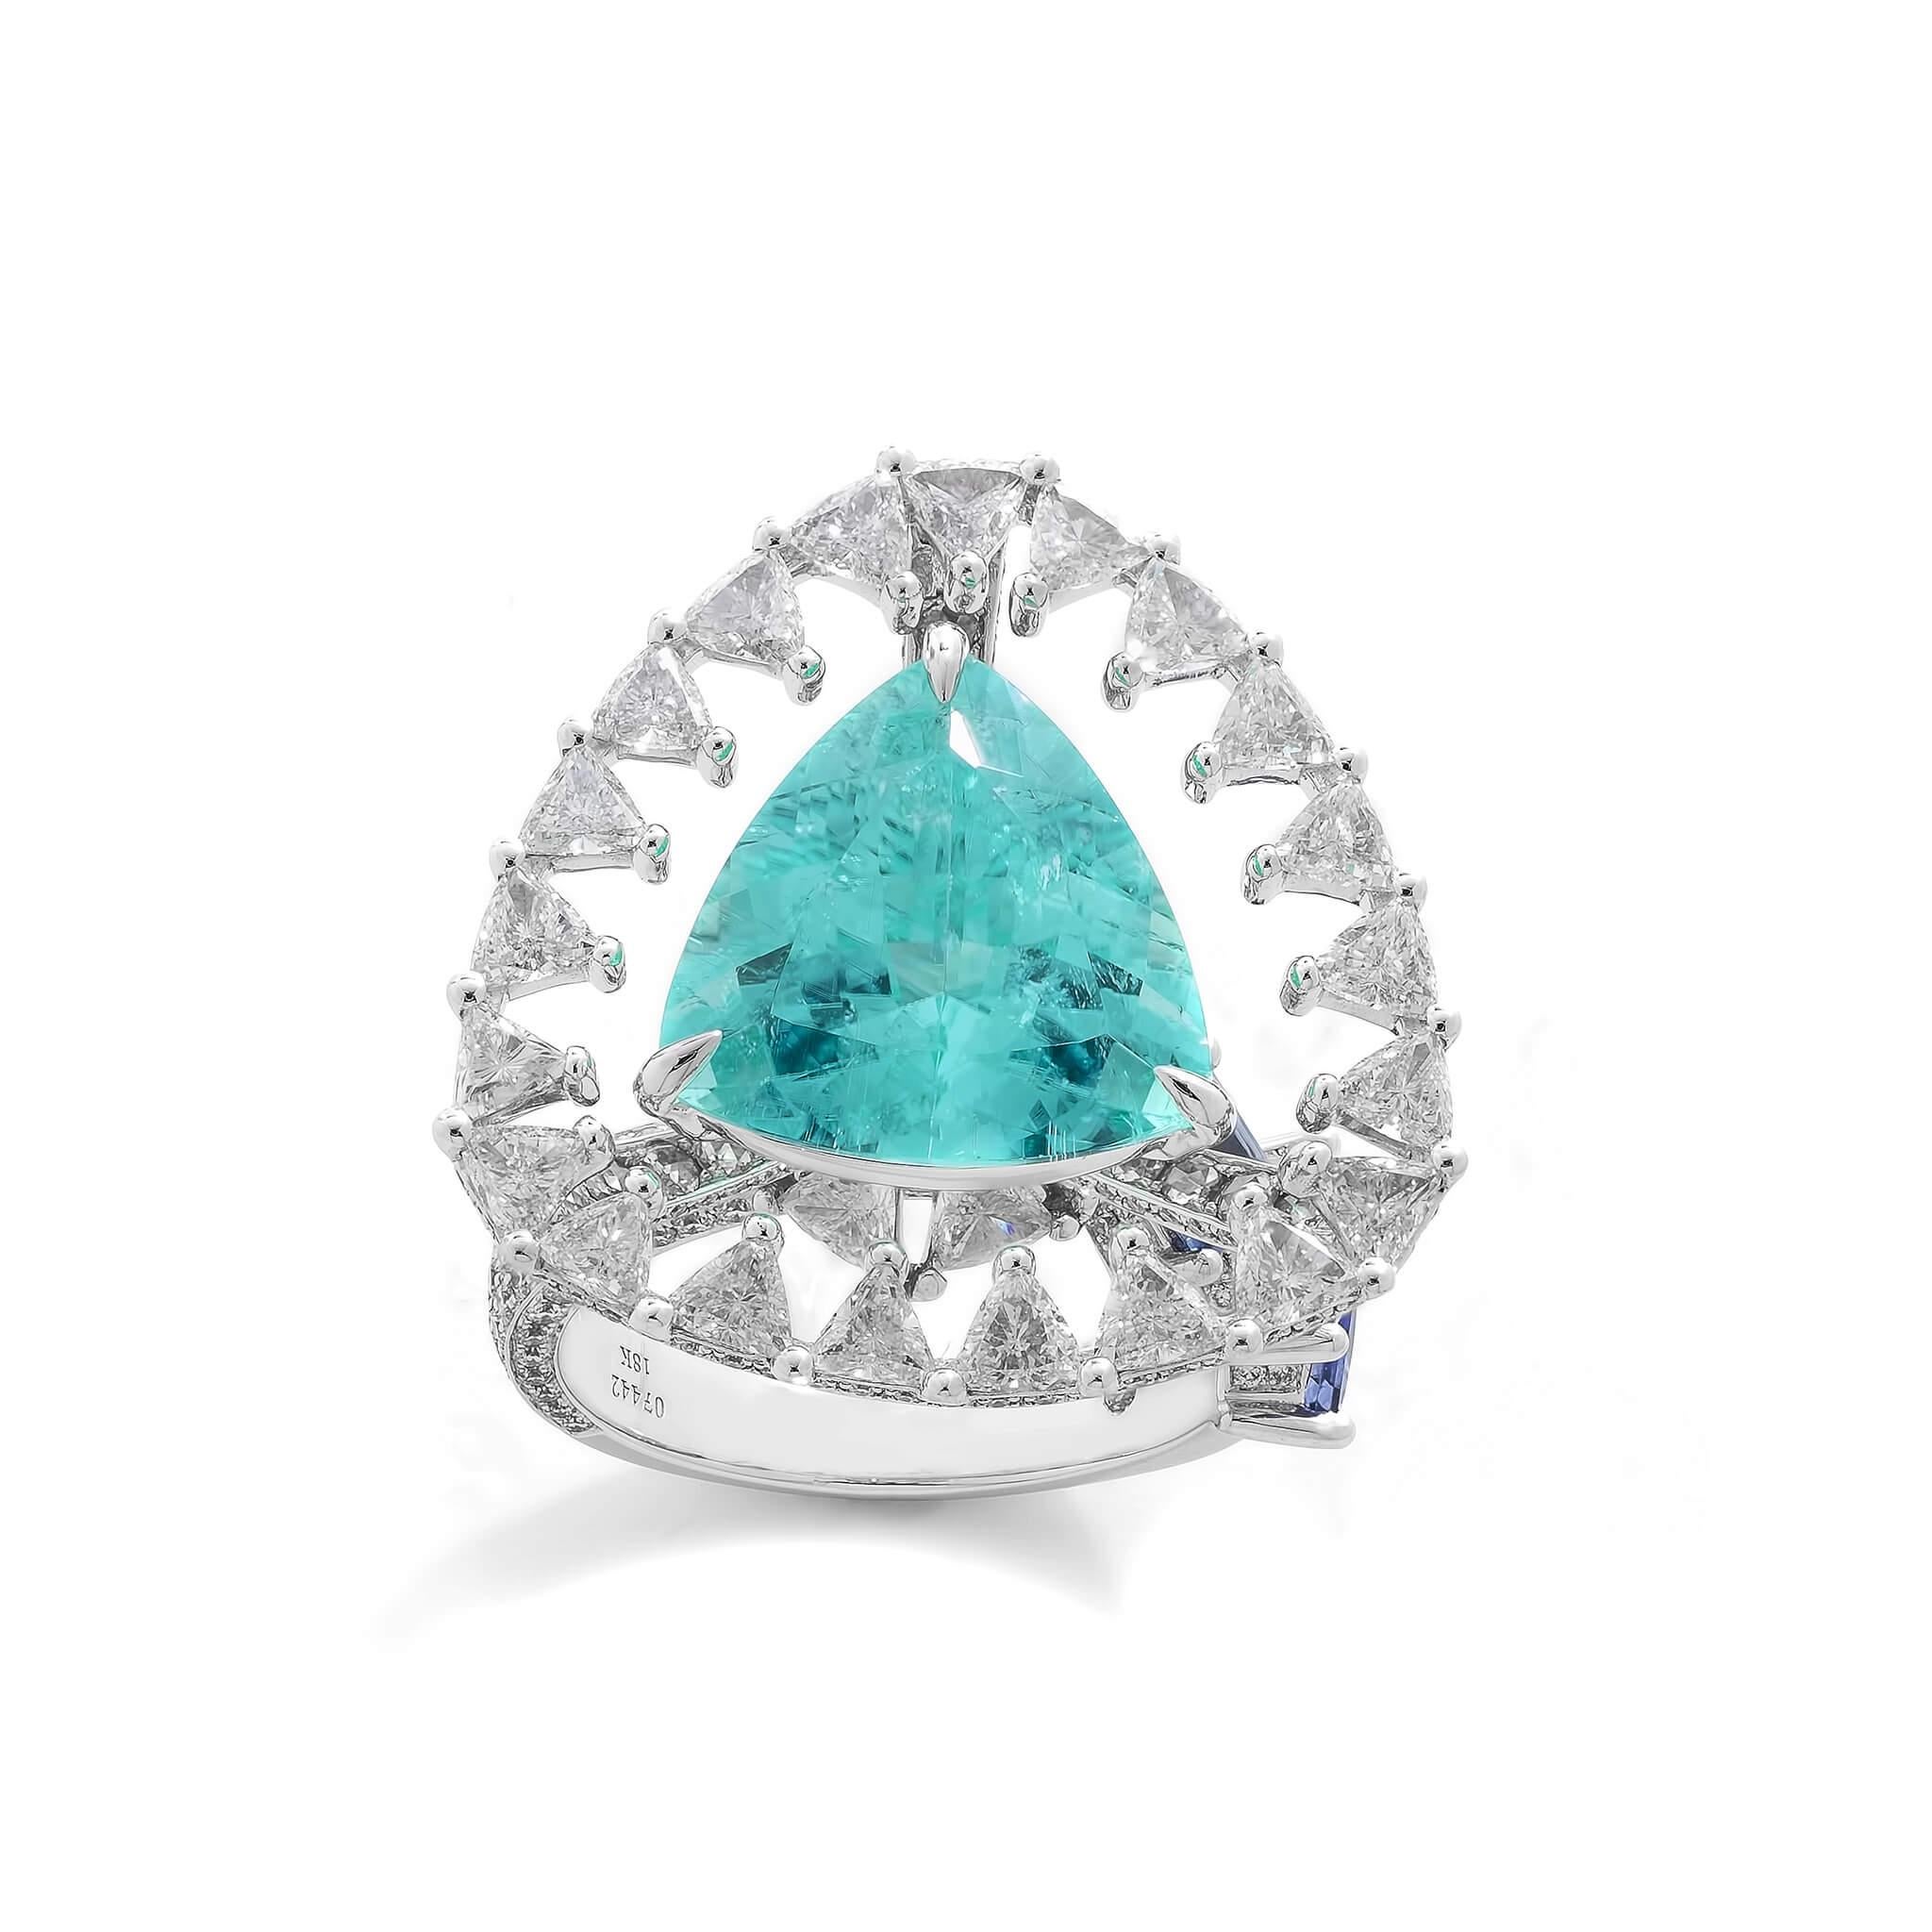 Coomi Trinity collection 18K white gold cocktail ring with 7.77cts floating paraiba, 3.90cts diamond, and 1.36cts blue sapphire.